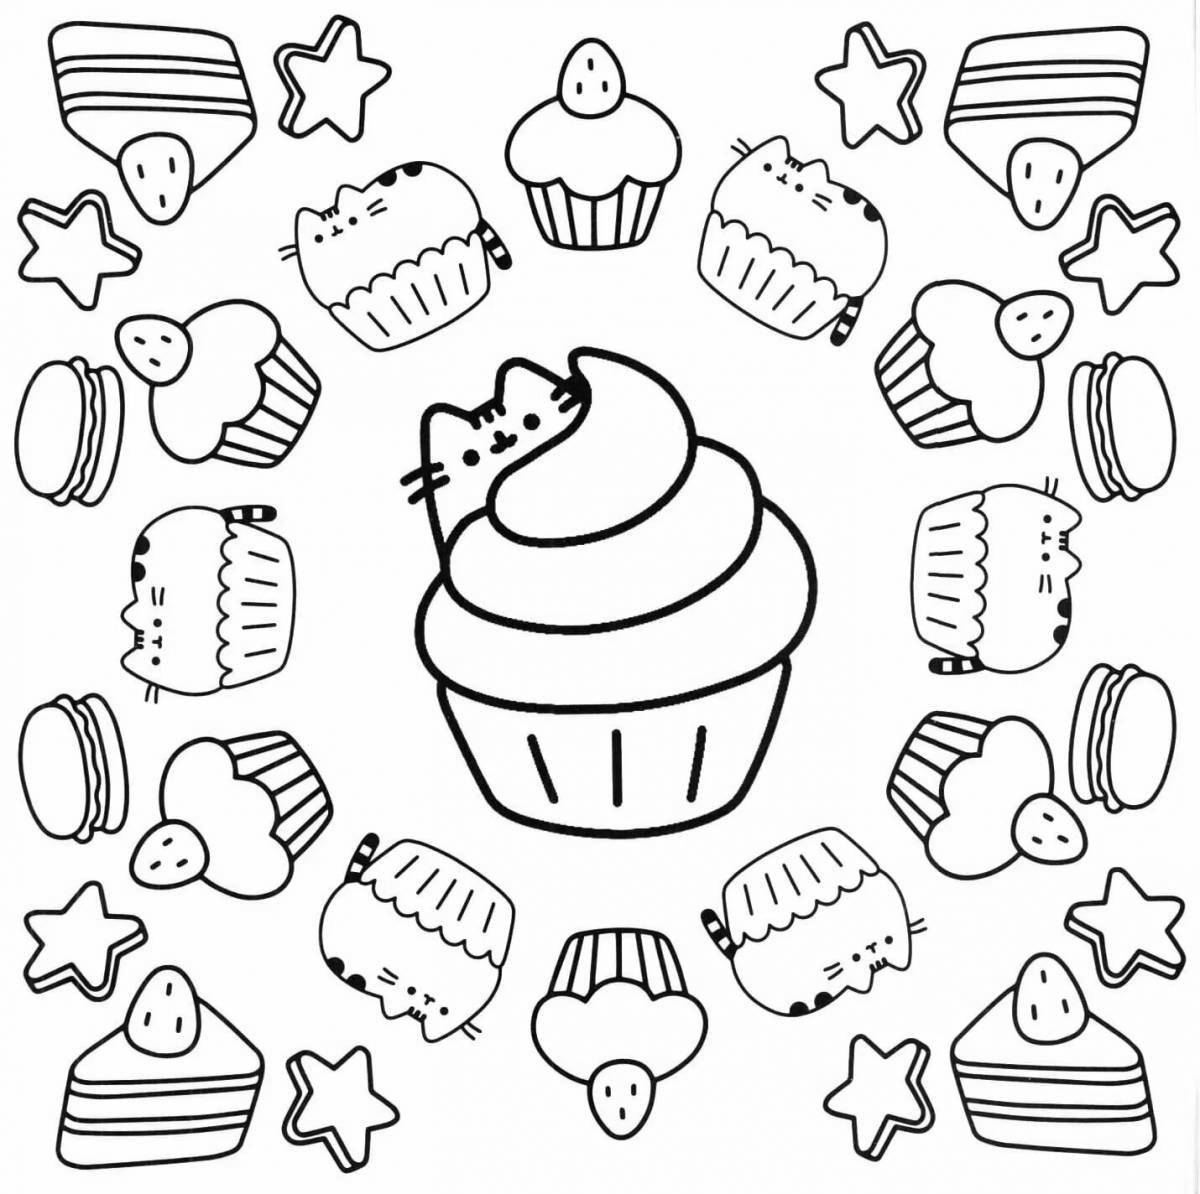 Bright coloring pages, small sticker designs